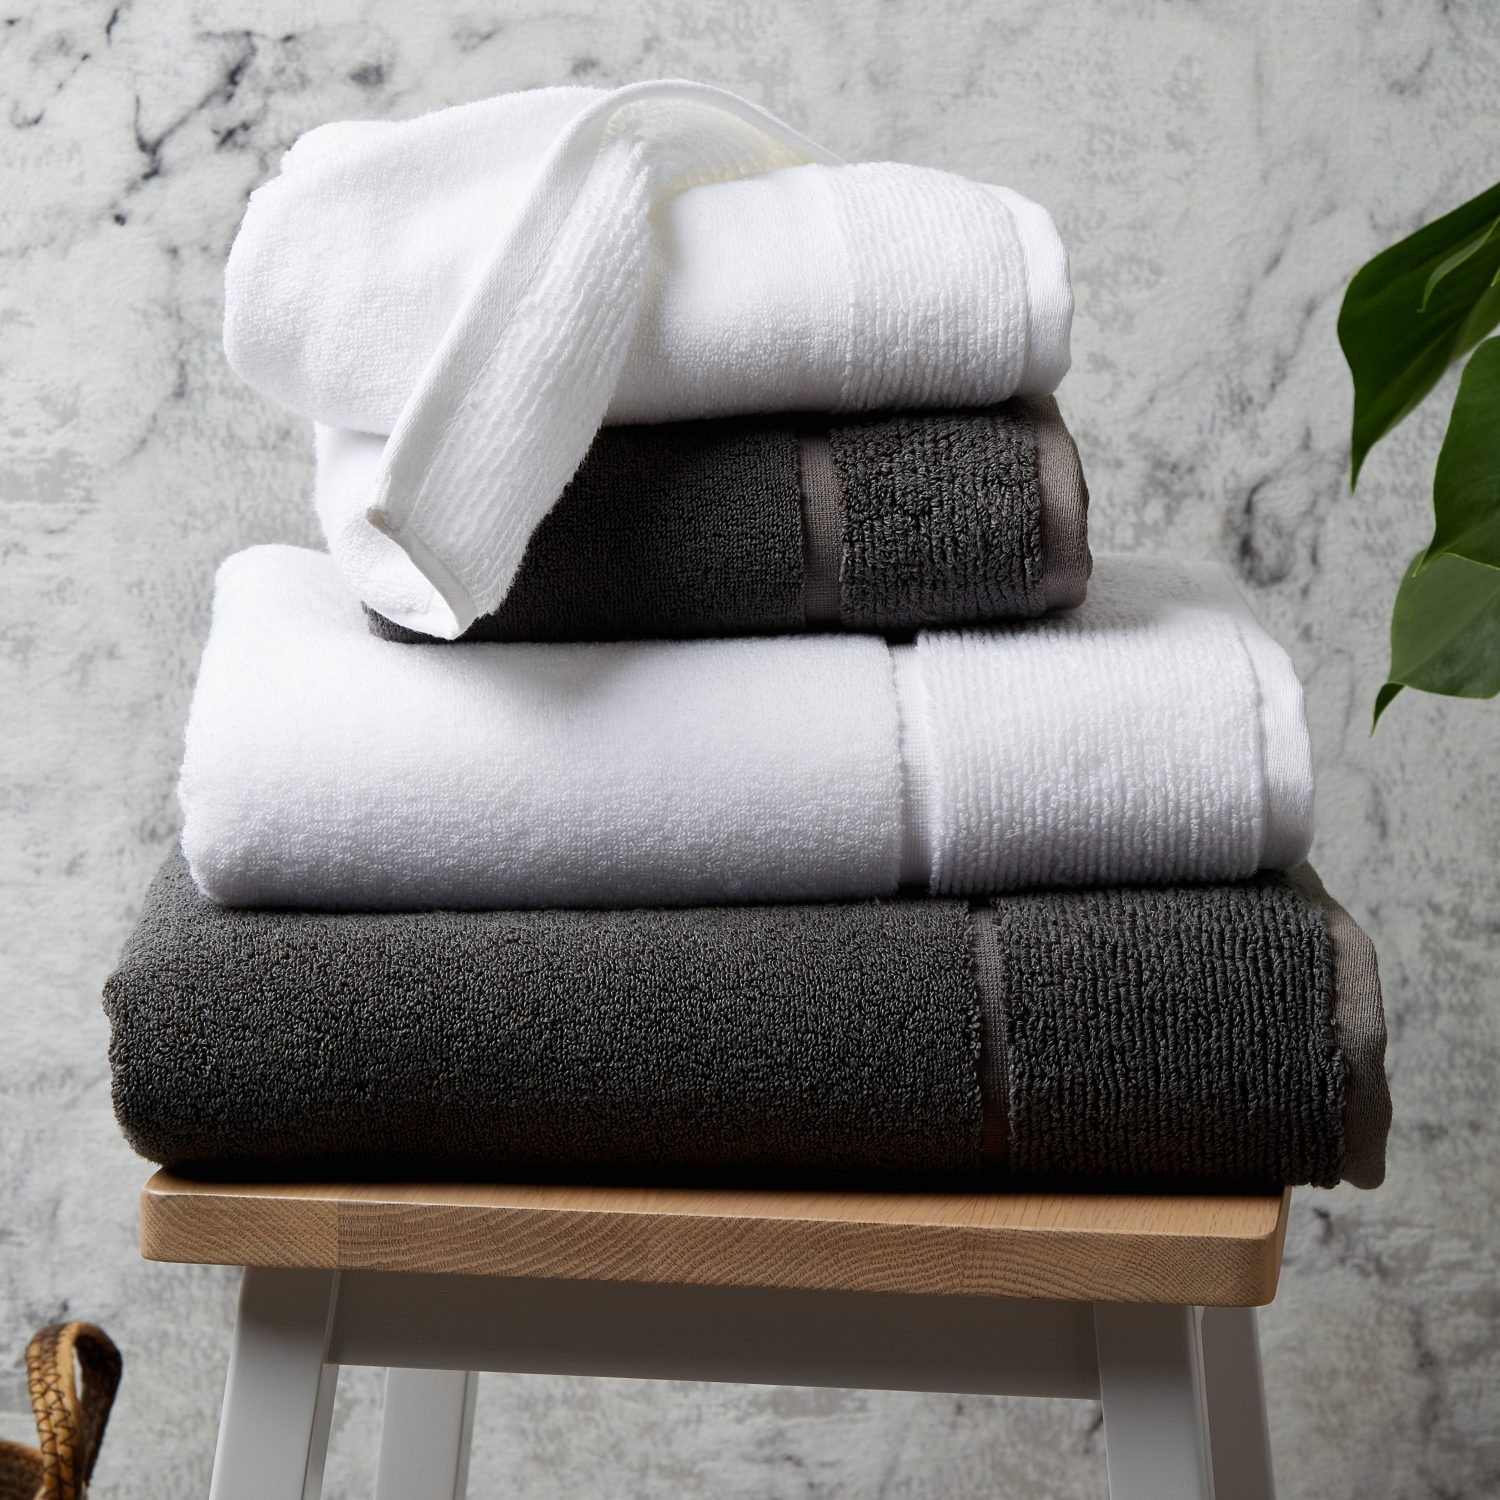 Best Hand Towels For Bathroom 2023